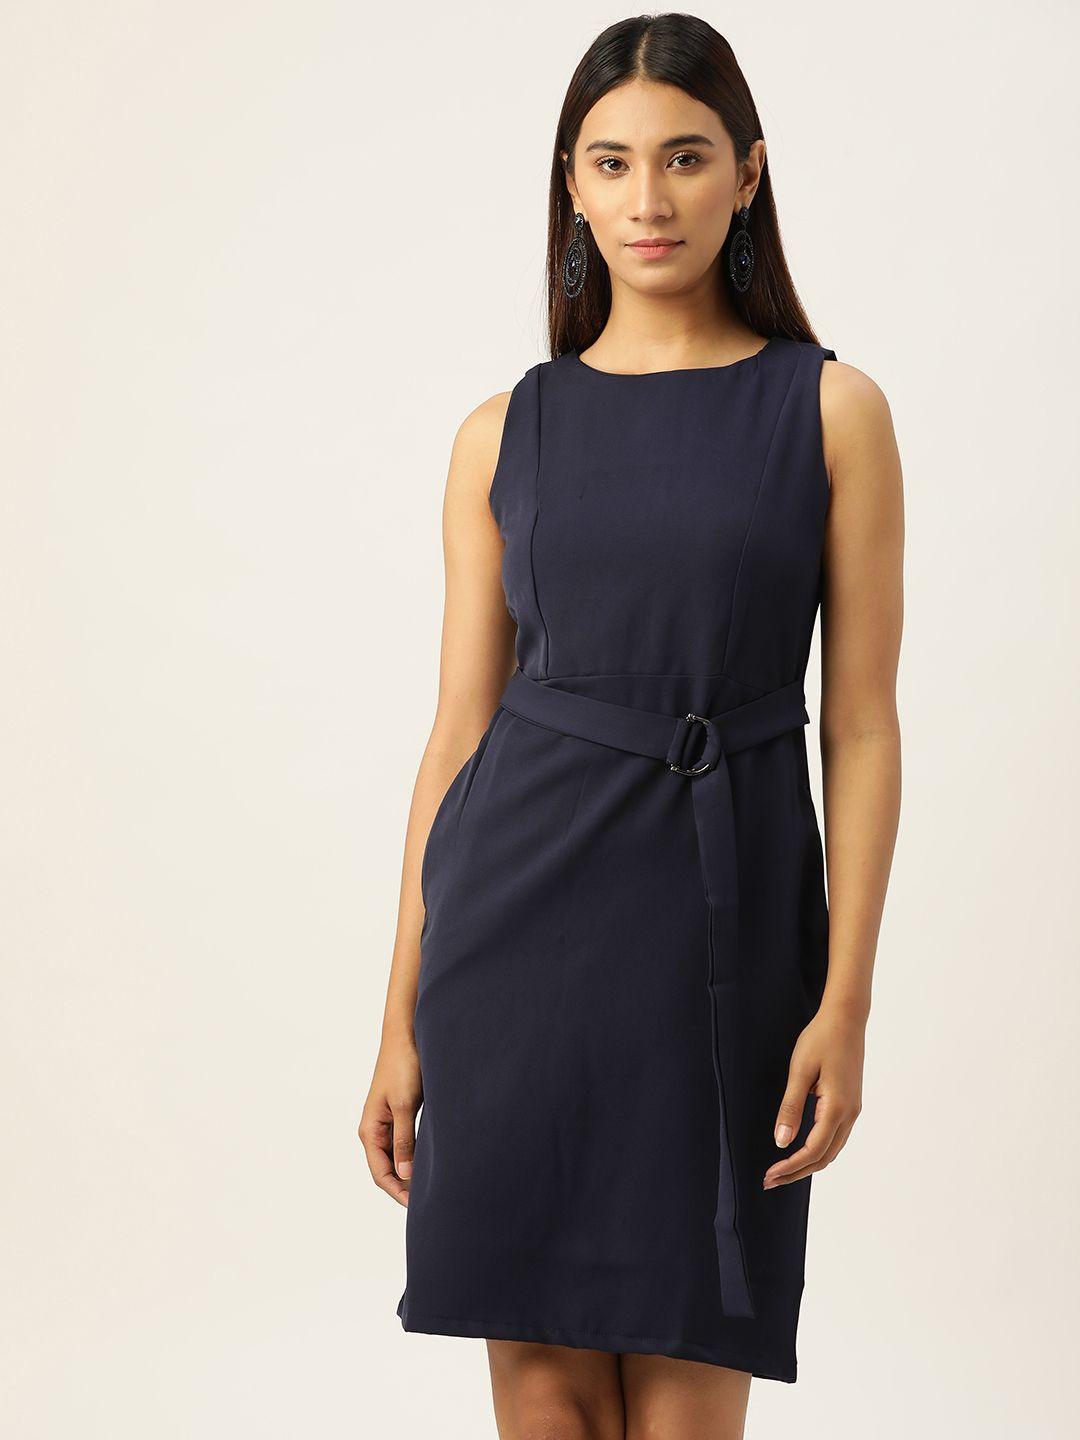 and-women-navy-blue-solid-sheath-dress